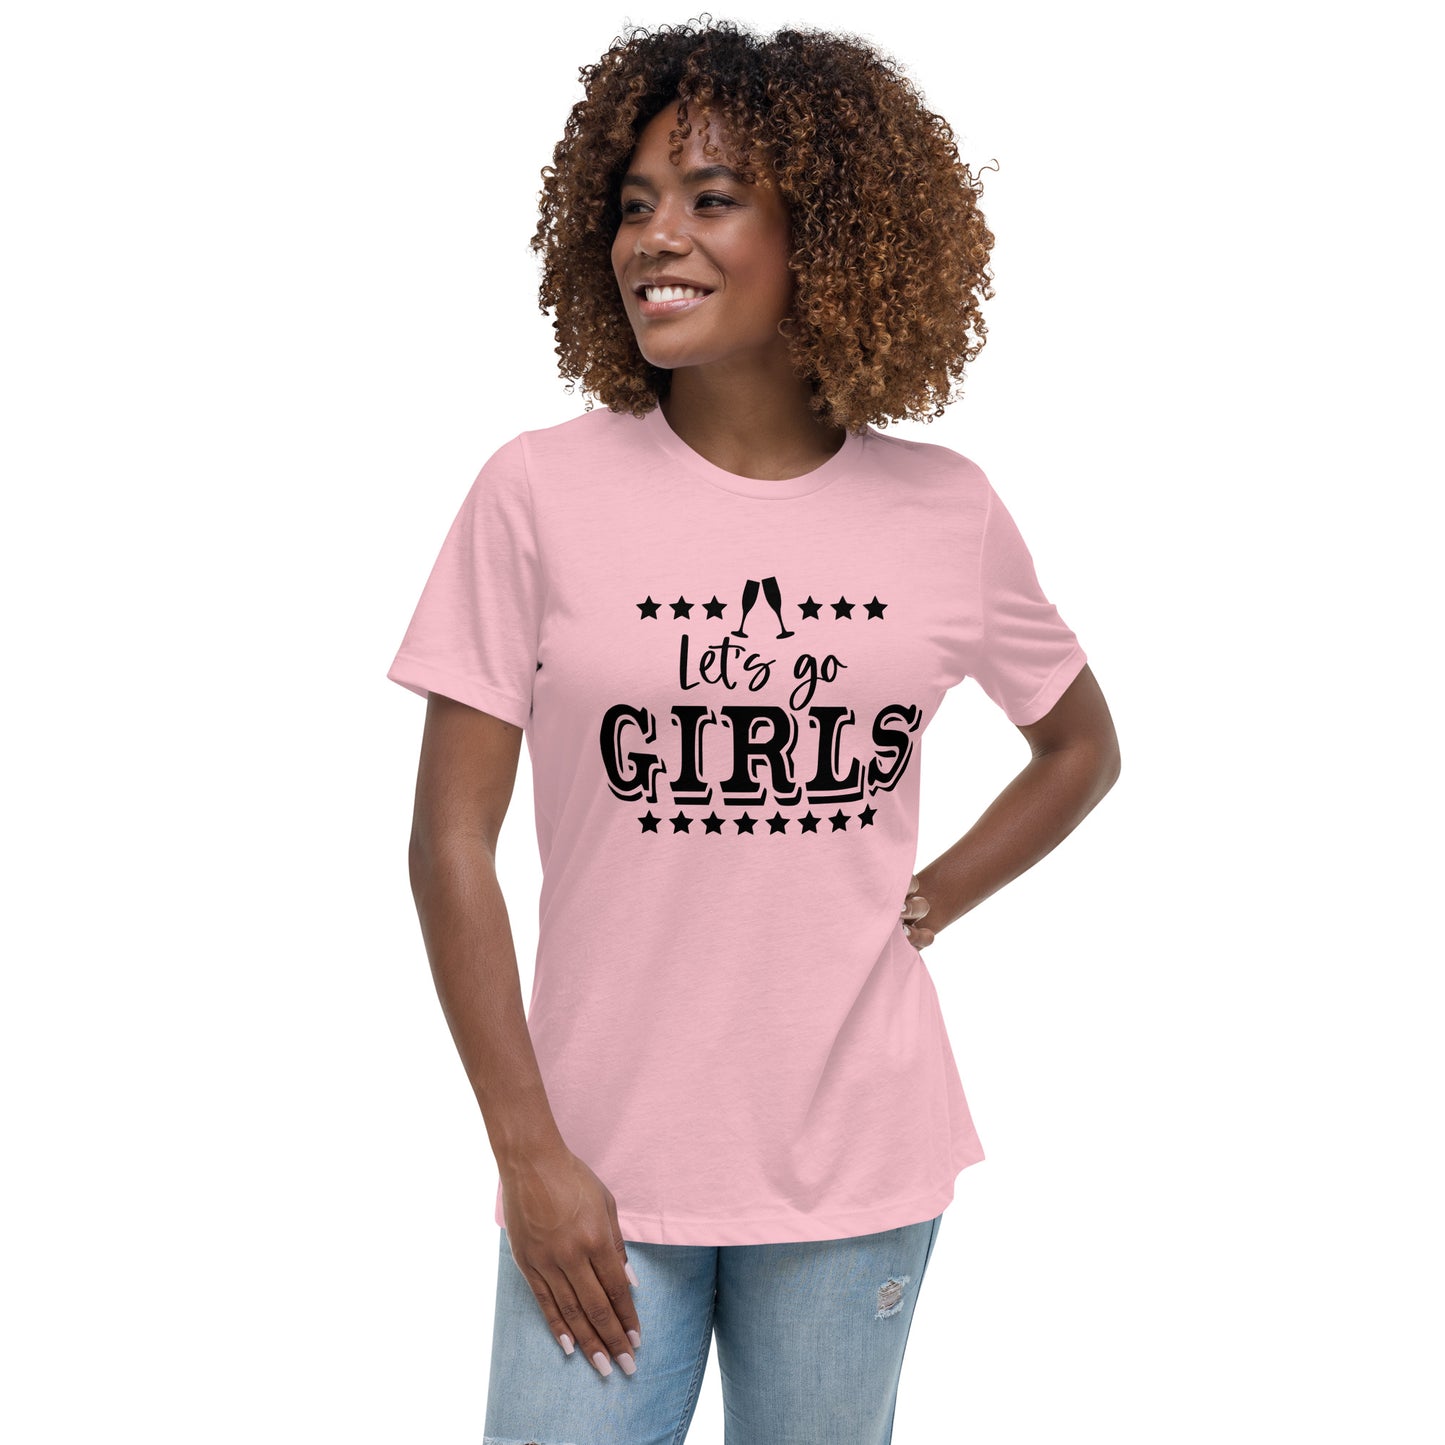 Let's Go Girls Bridal and Bachelorette Party Relaxed T-Shirt CedarHill Country Market